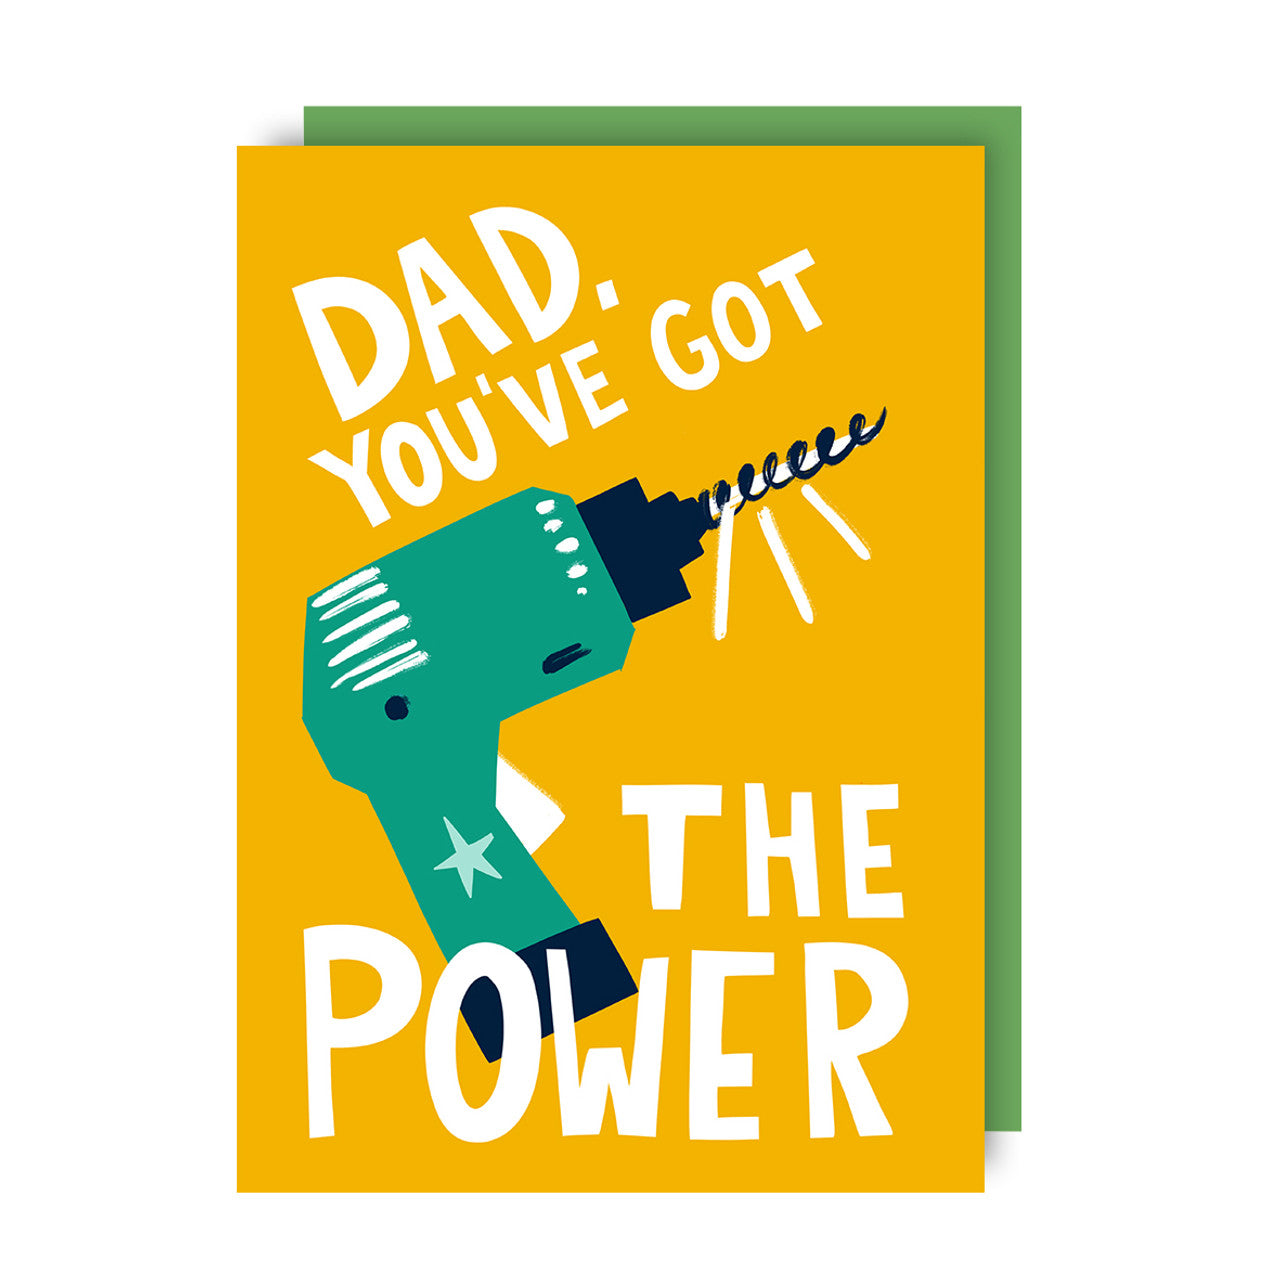 Father's Day text reads "Dad you've got the power"